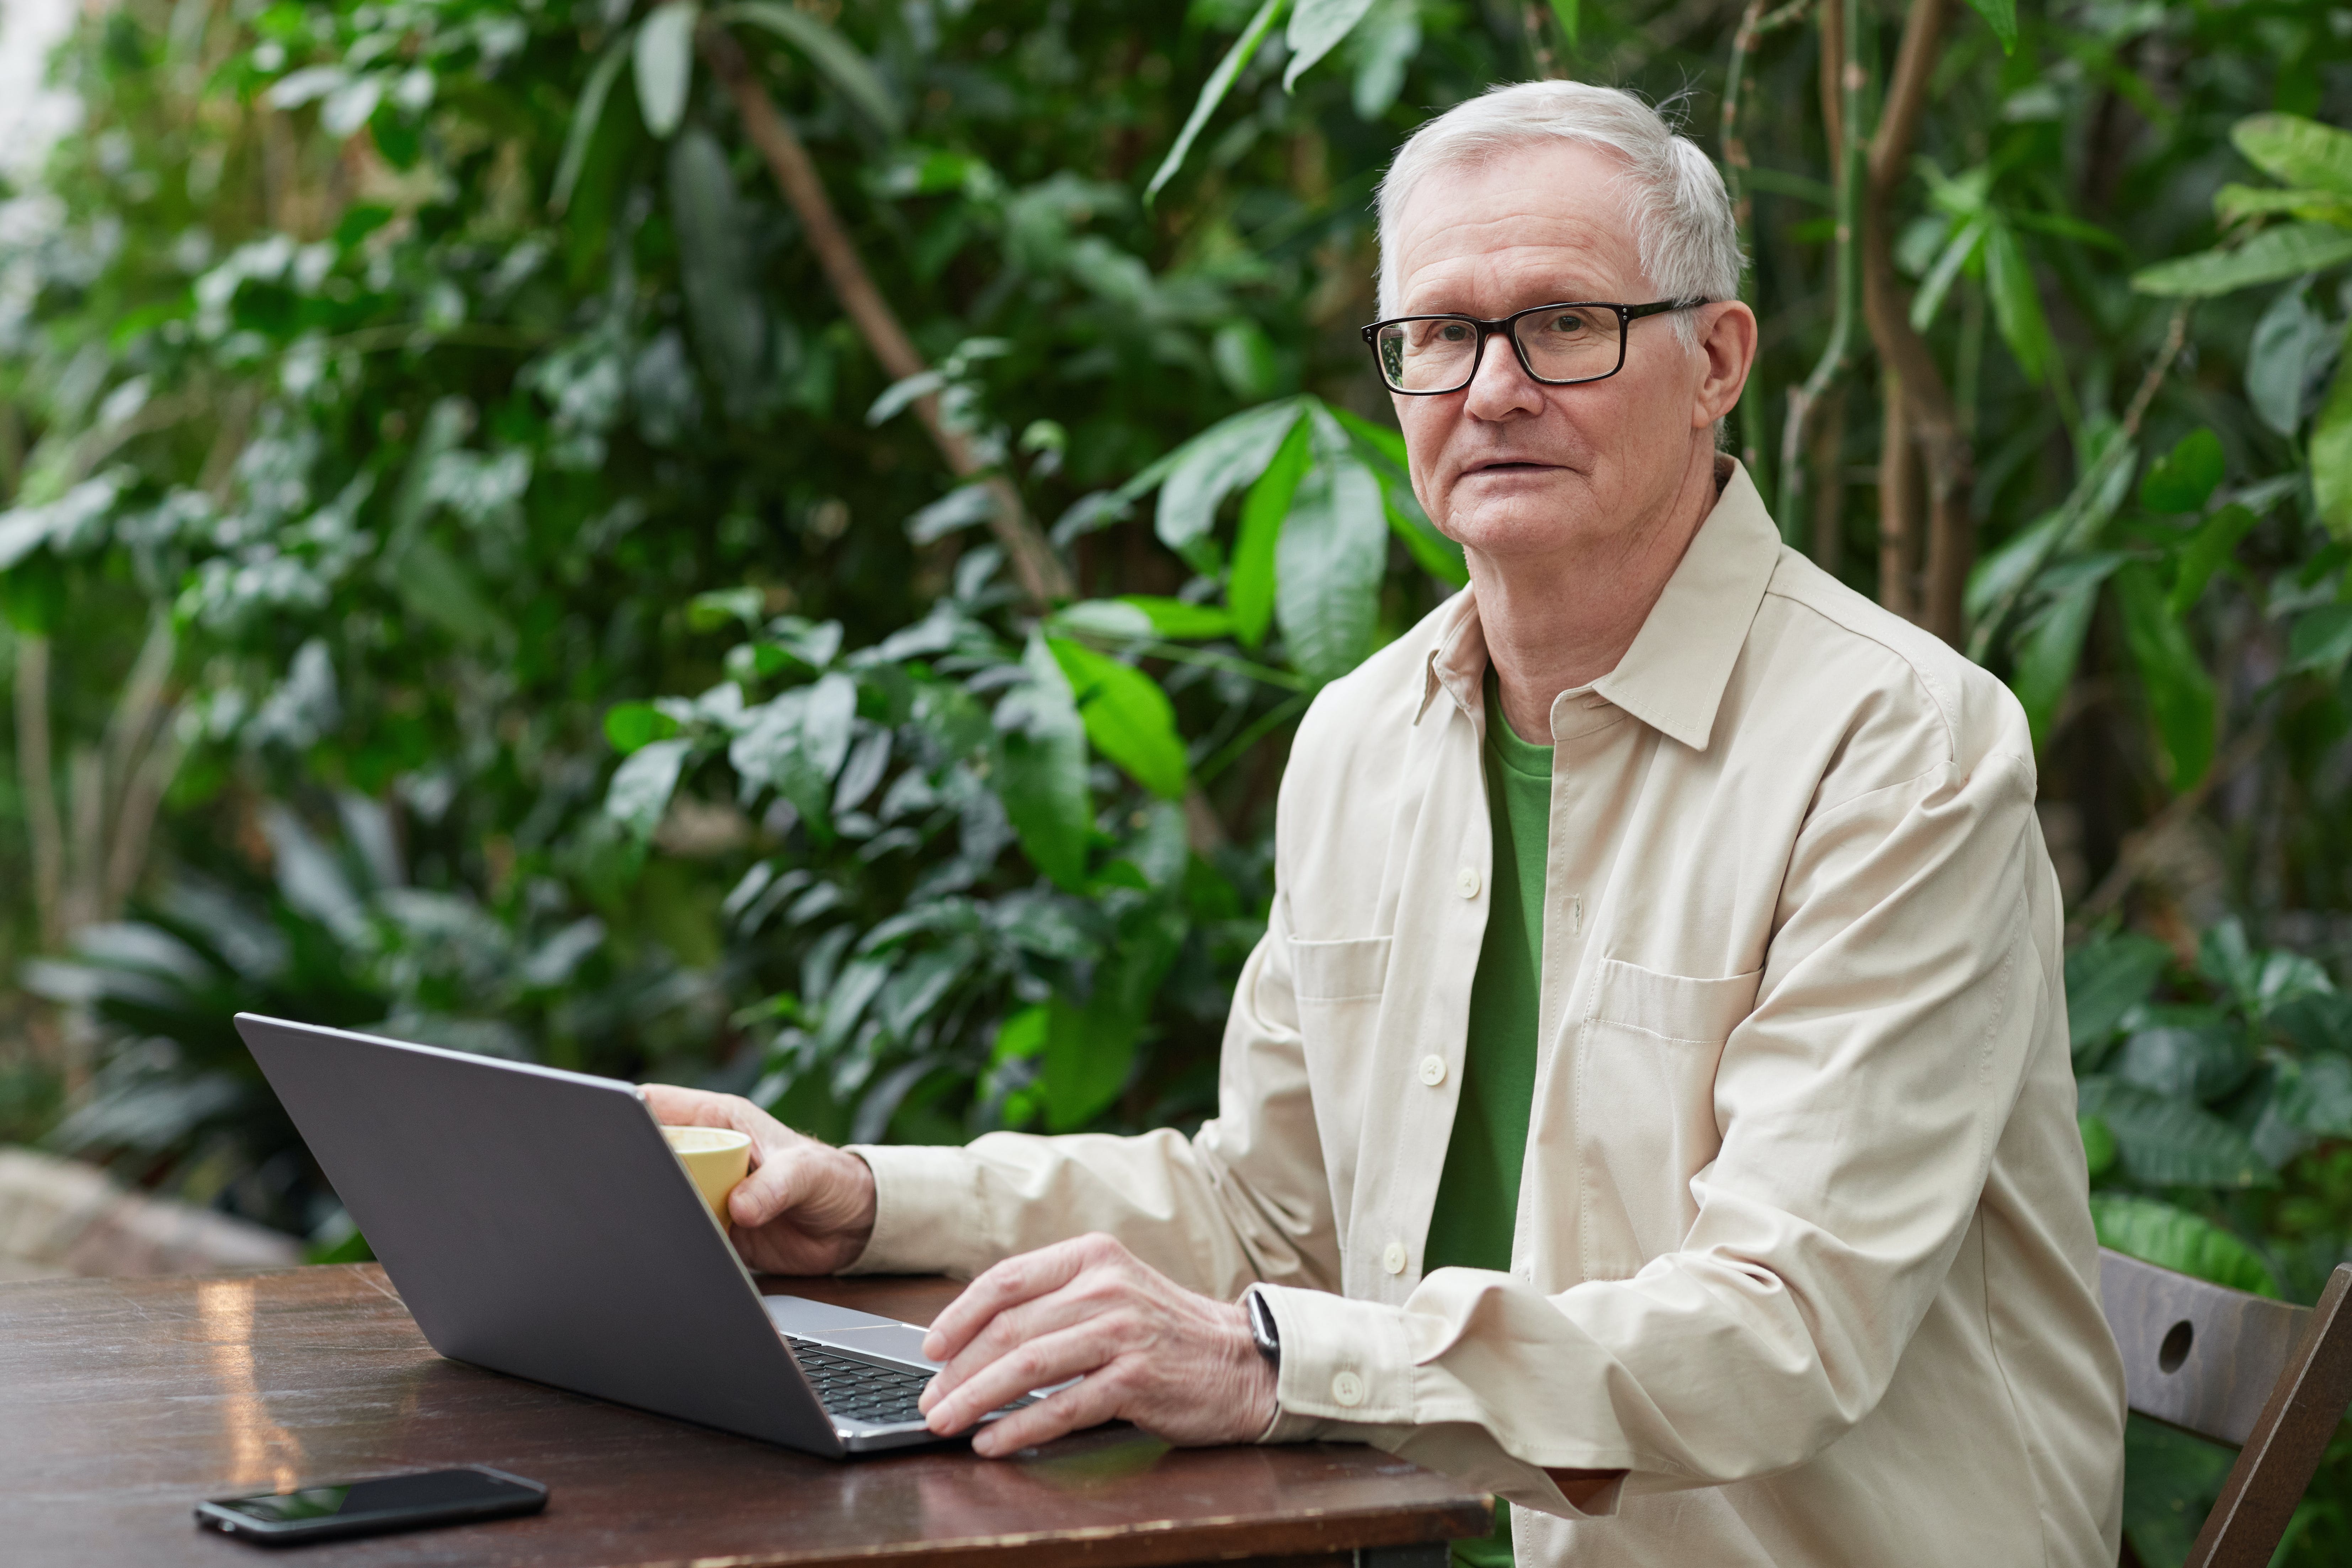 An older man sitting with a laptop | Source: Pexels